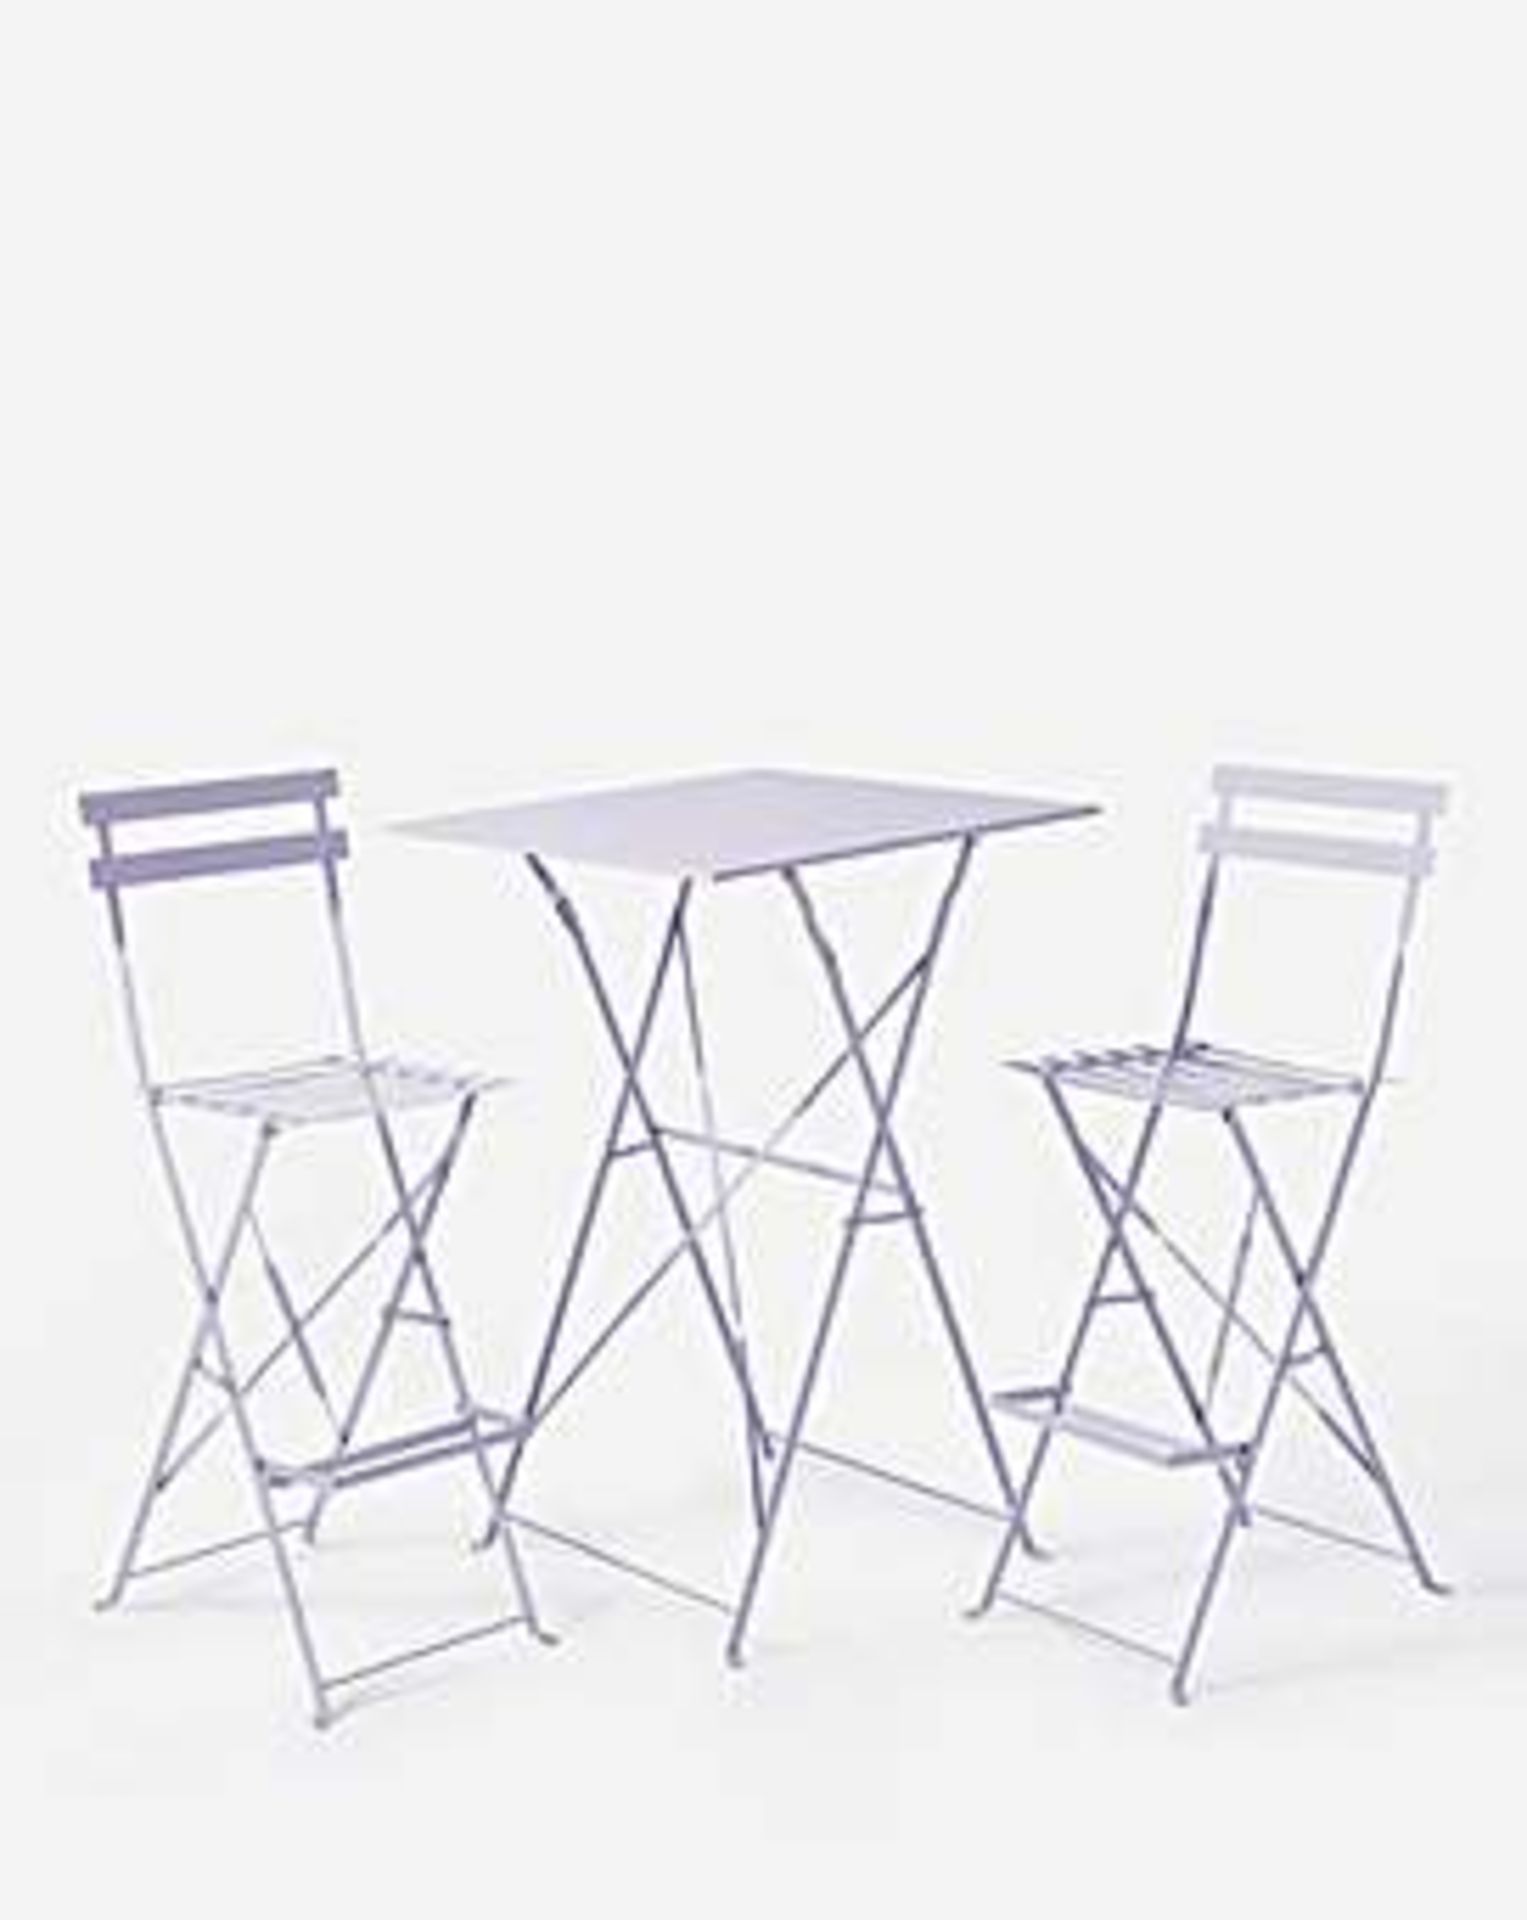 TRADE PALLET TO CONTAIN 6x BRAND NEW Palma Bistro Bar Set LILAC RRP £159 EACH - Image 3 of 3